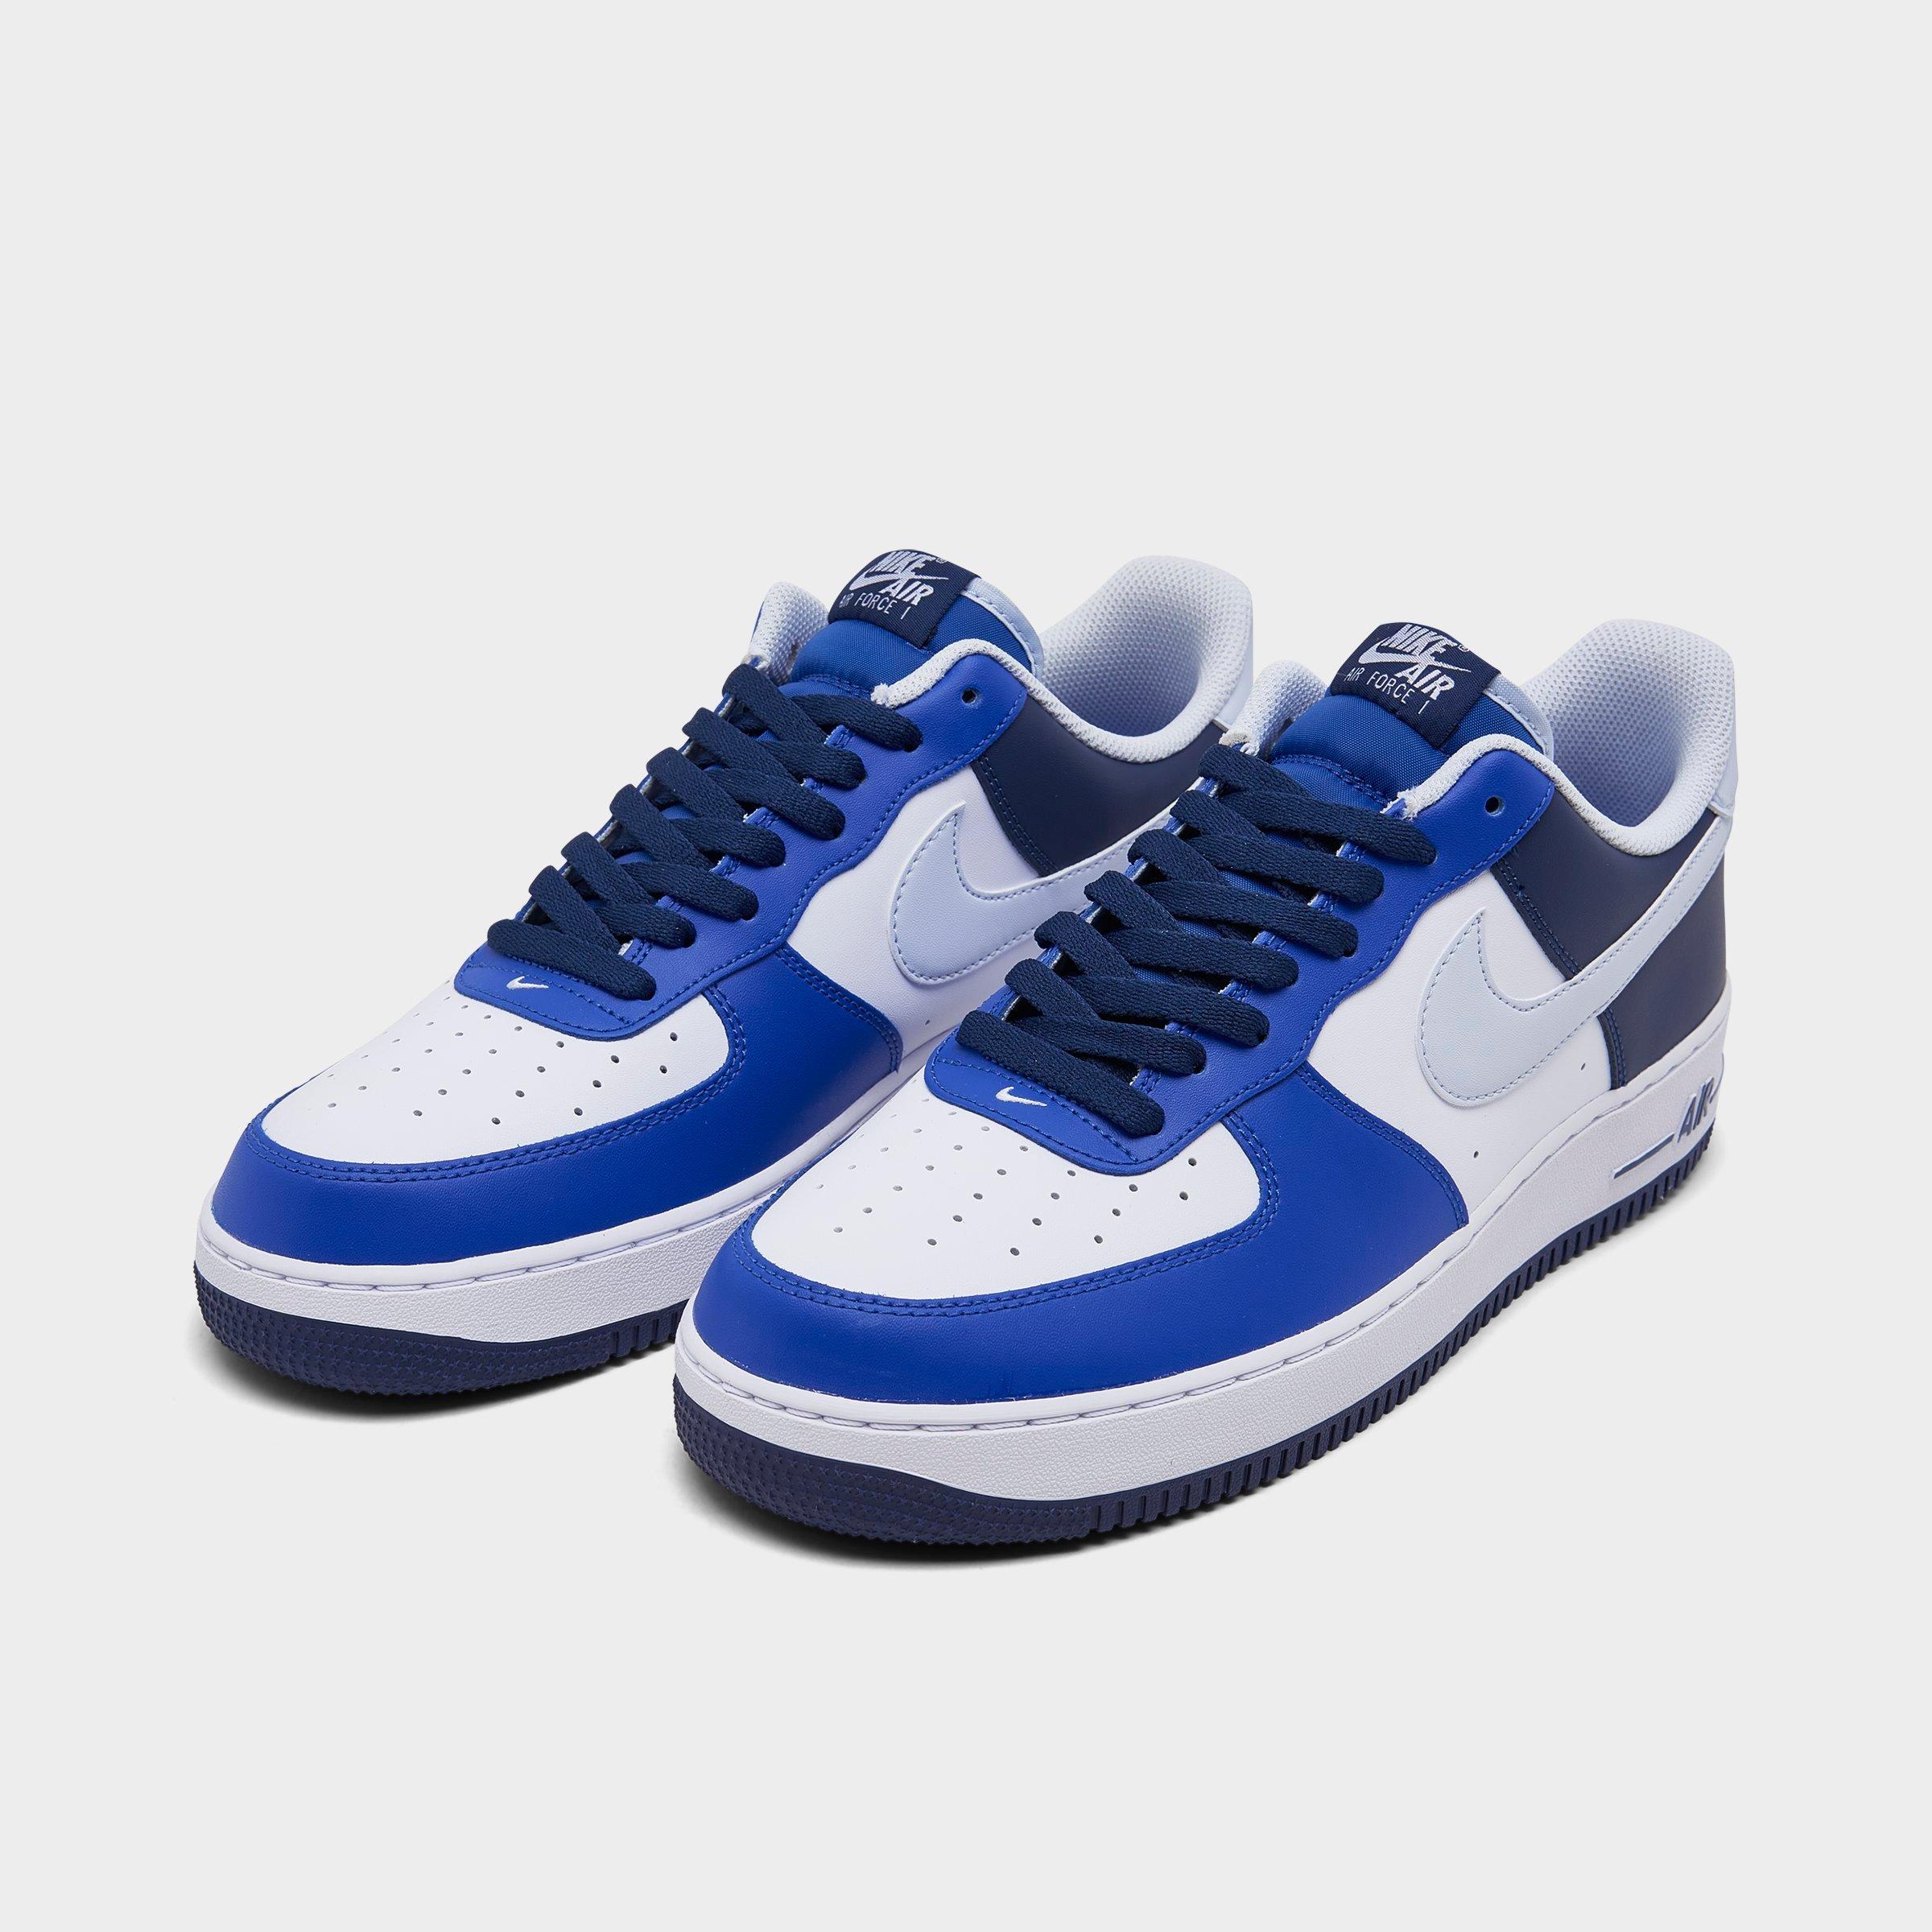 Men's Nike Air Force 1 '07 LV8 Casual Shoes| Finish Line